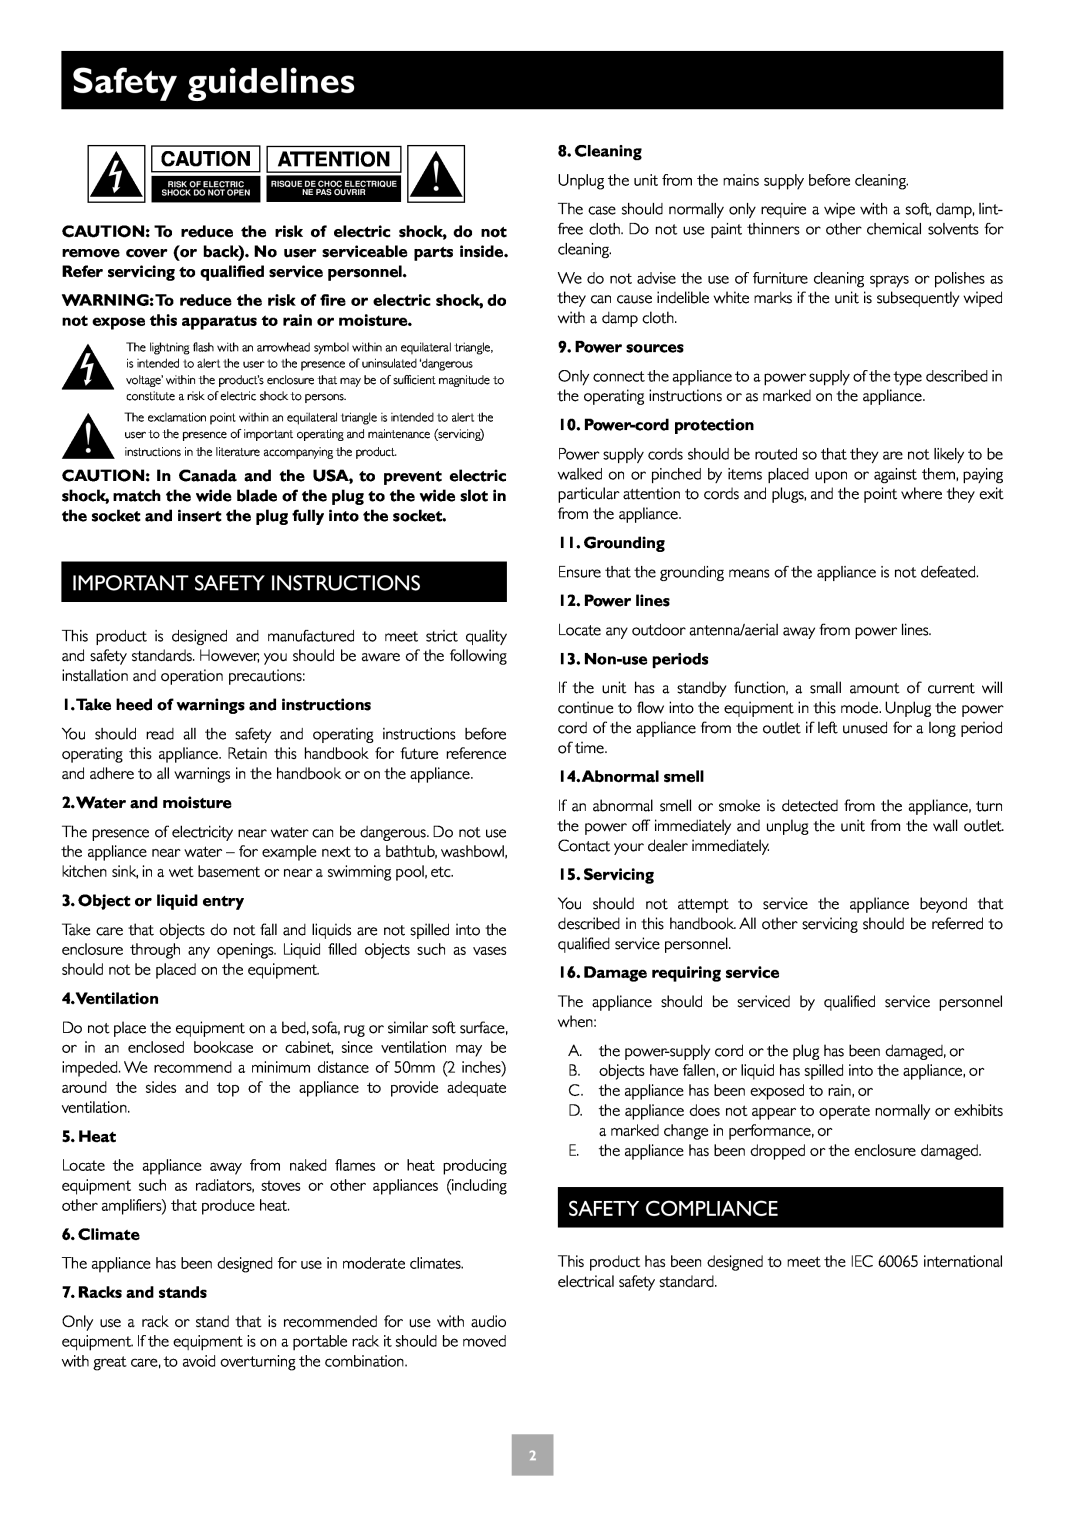 Arcam T31 manual Safety guidelines, Important Safety Instructions, Safety Compliance 